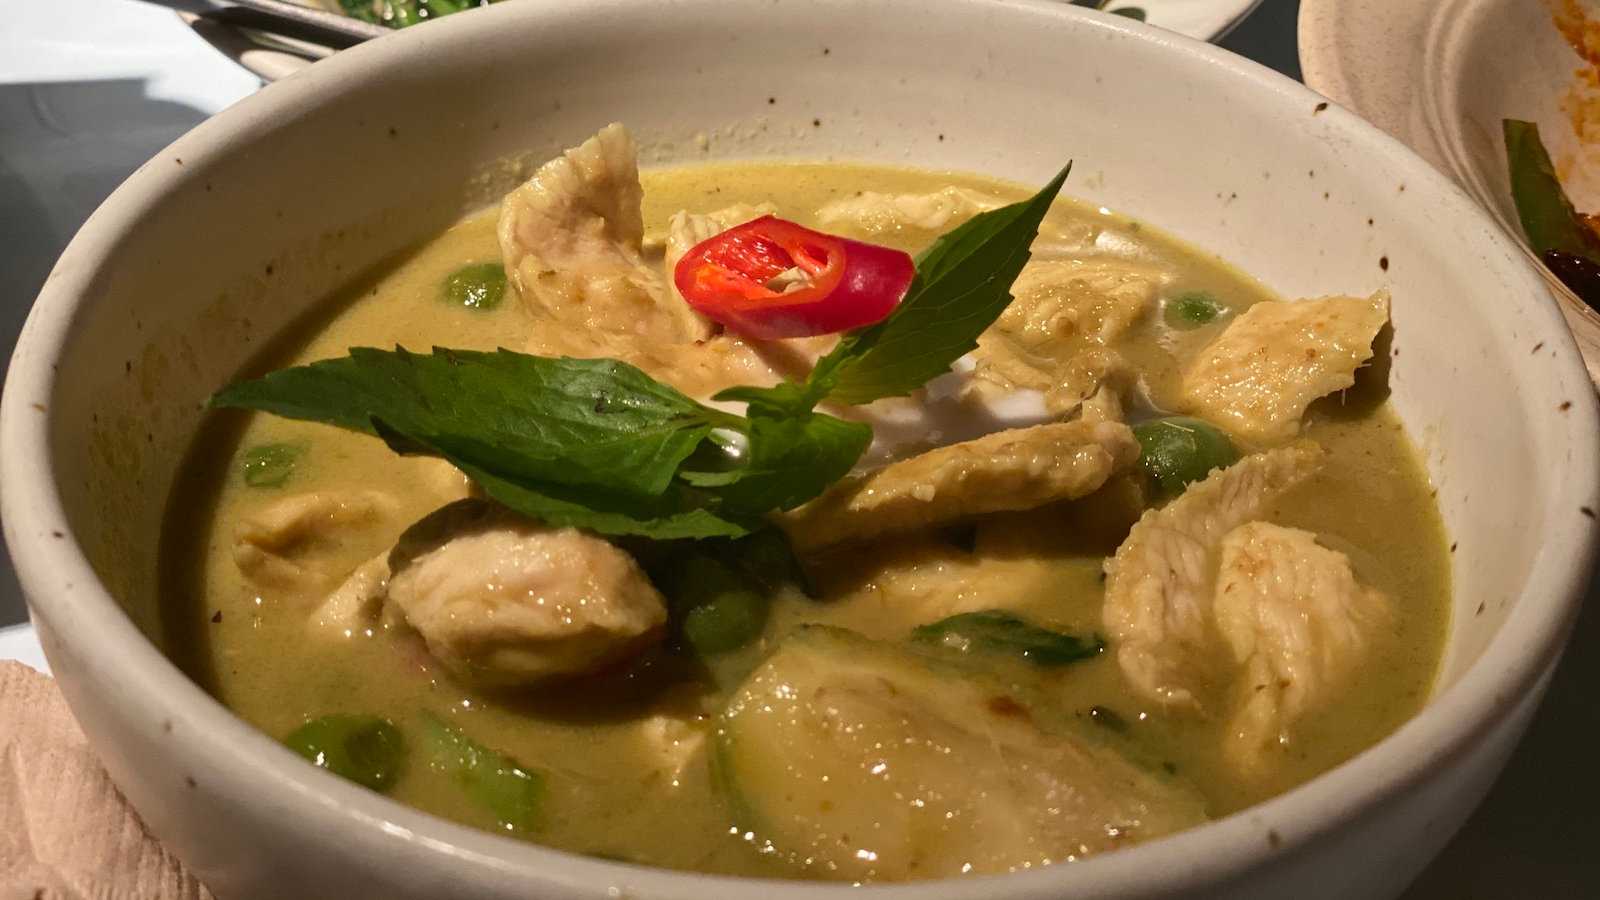 Thai green curry can be quite spicy but we love it